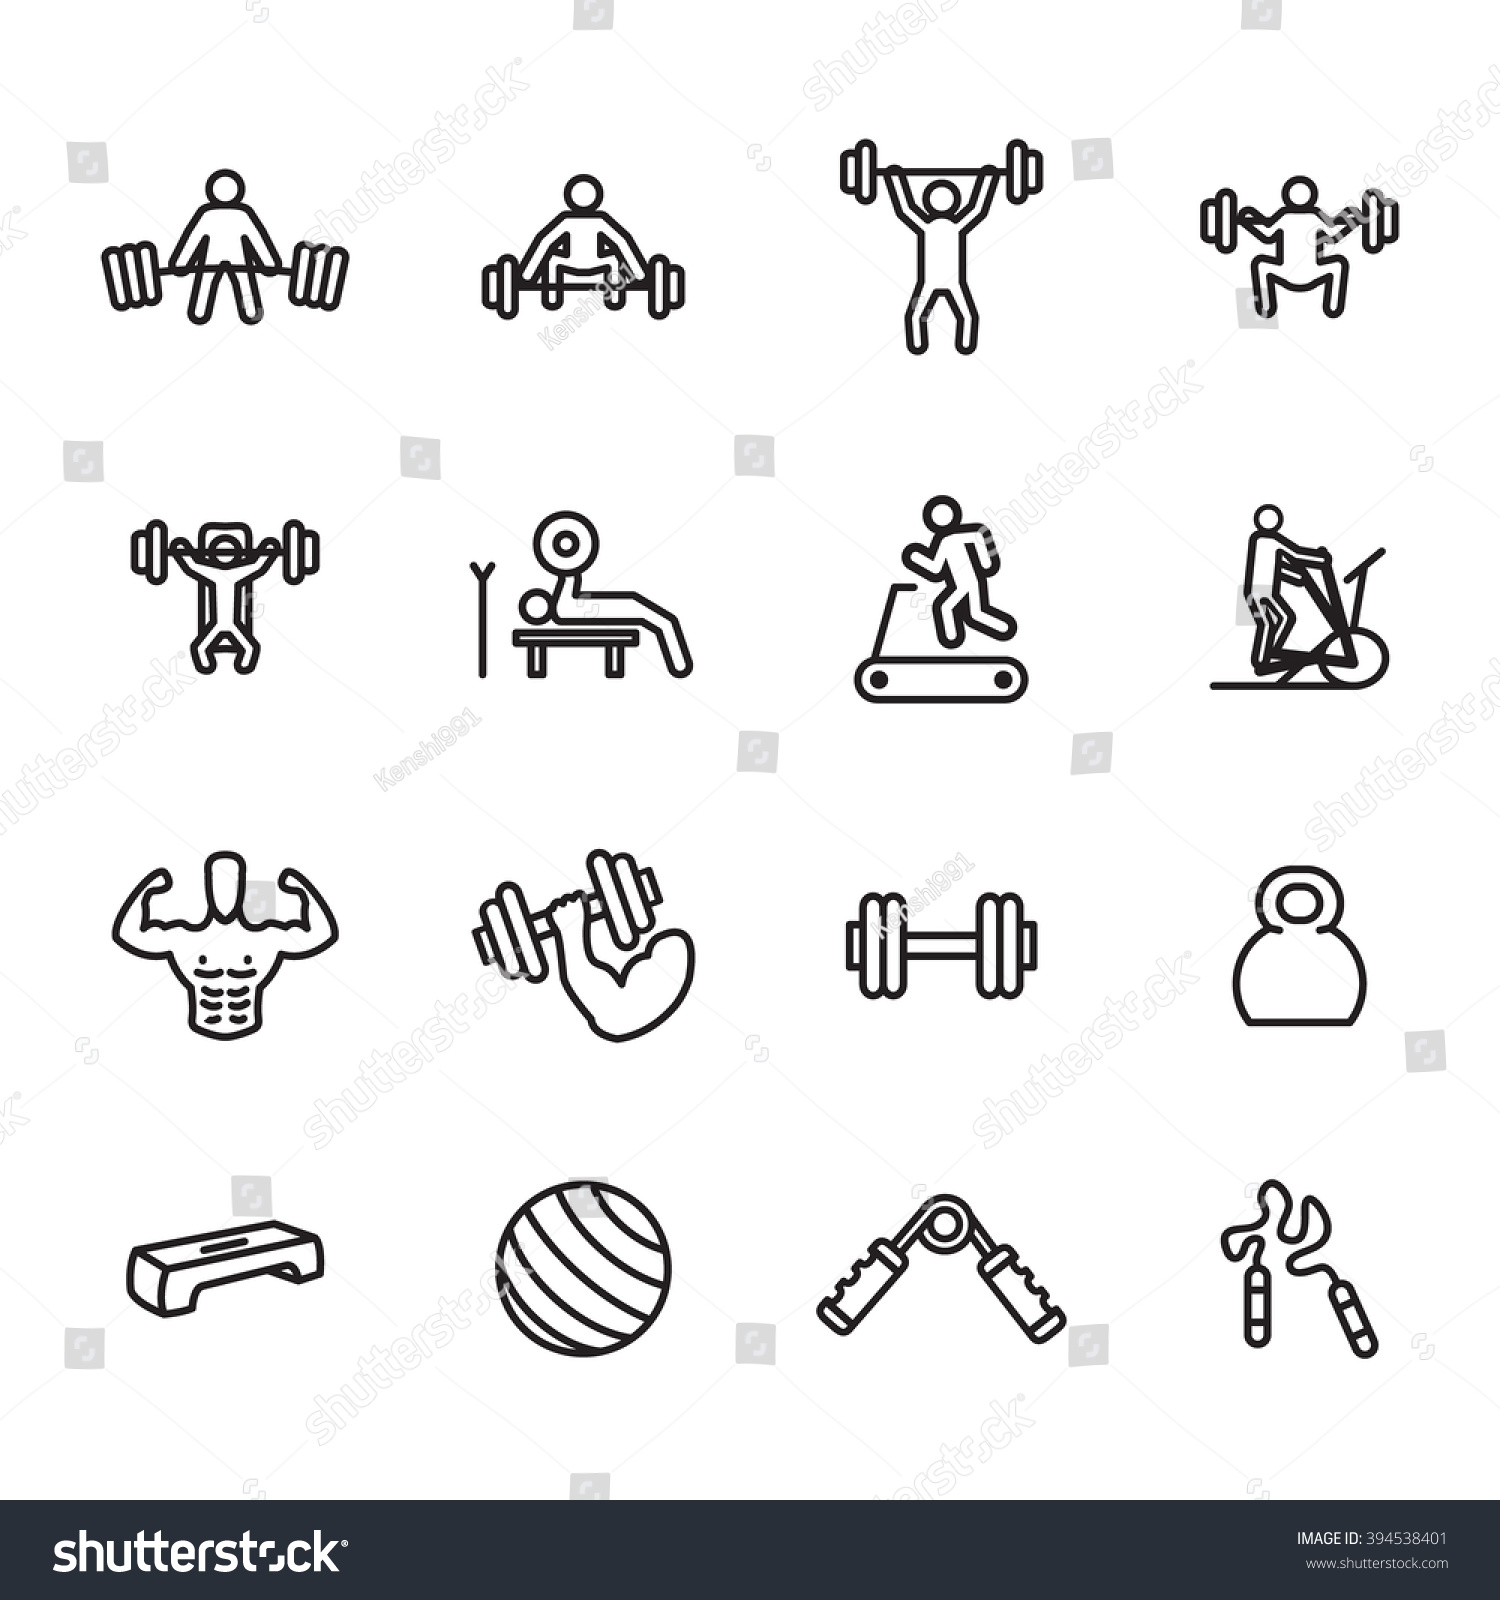 SVG of Fitness and exercise icon set. Vector illustration.  svg